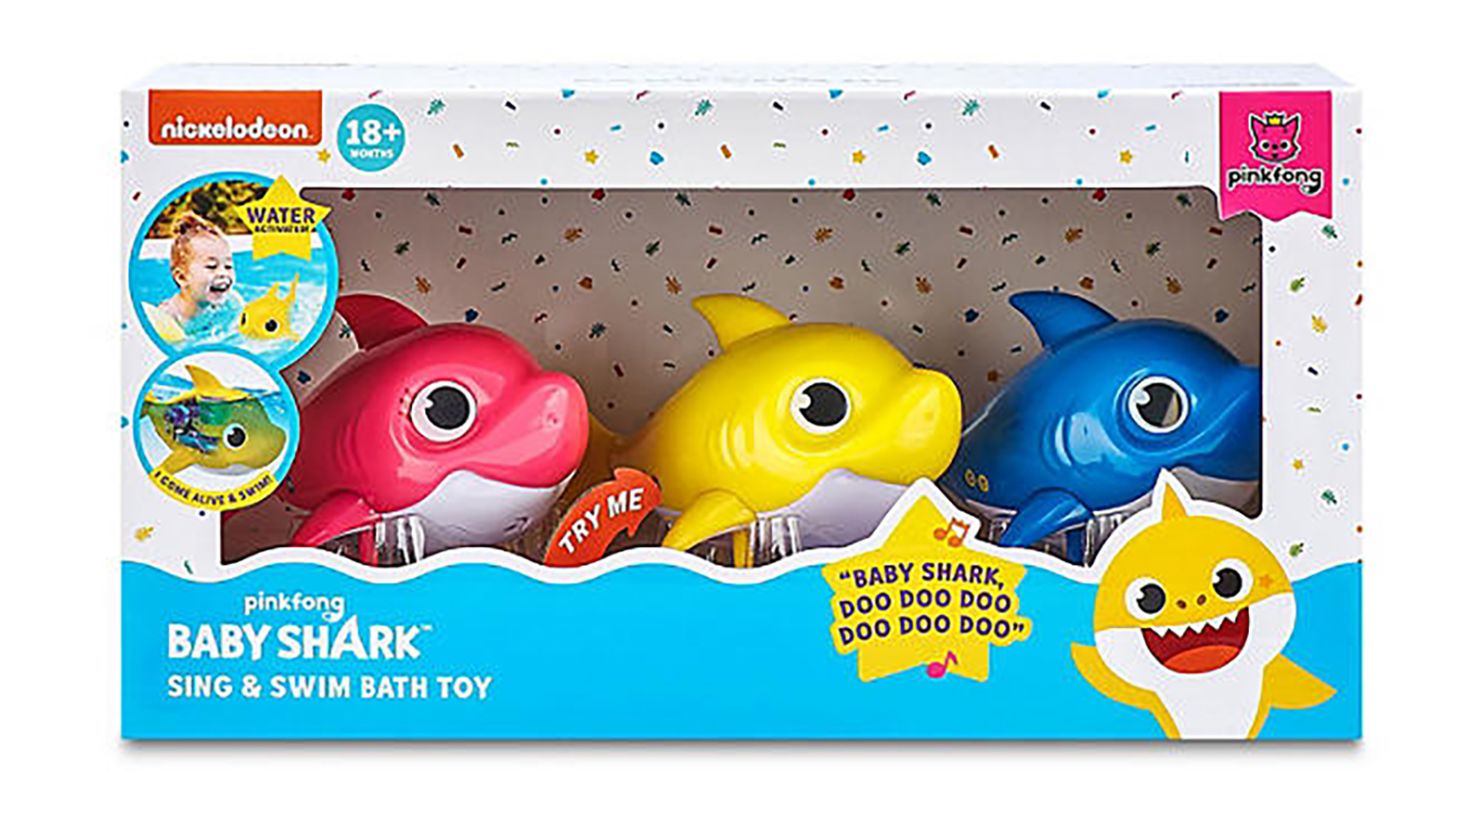 Popular children's toy discontinued by major retailers over safety concerns